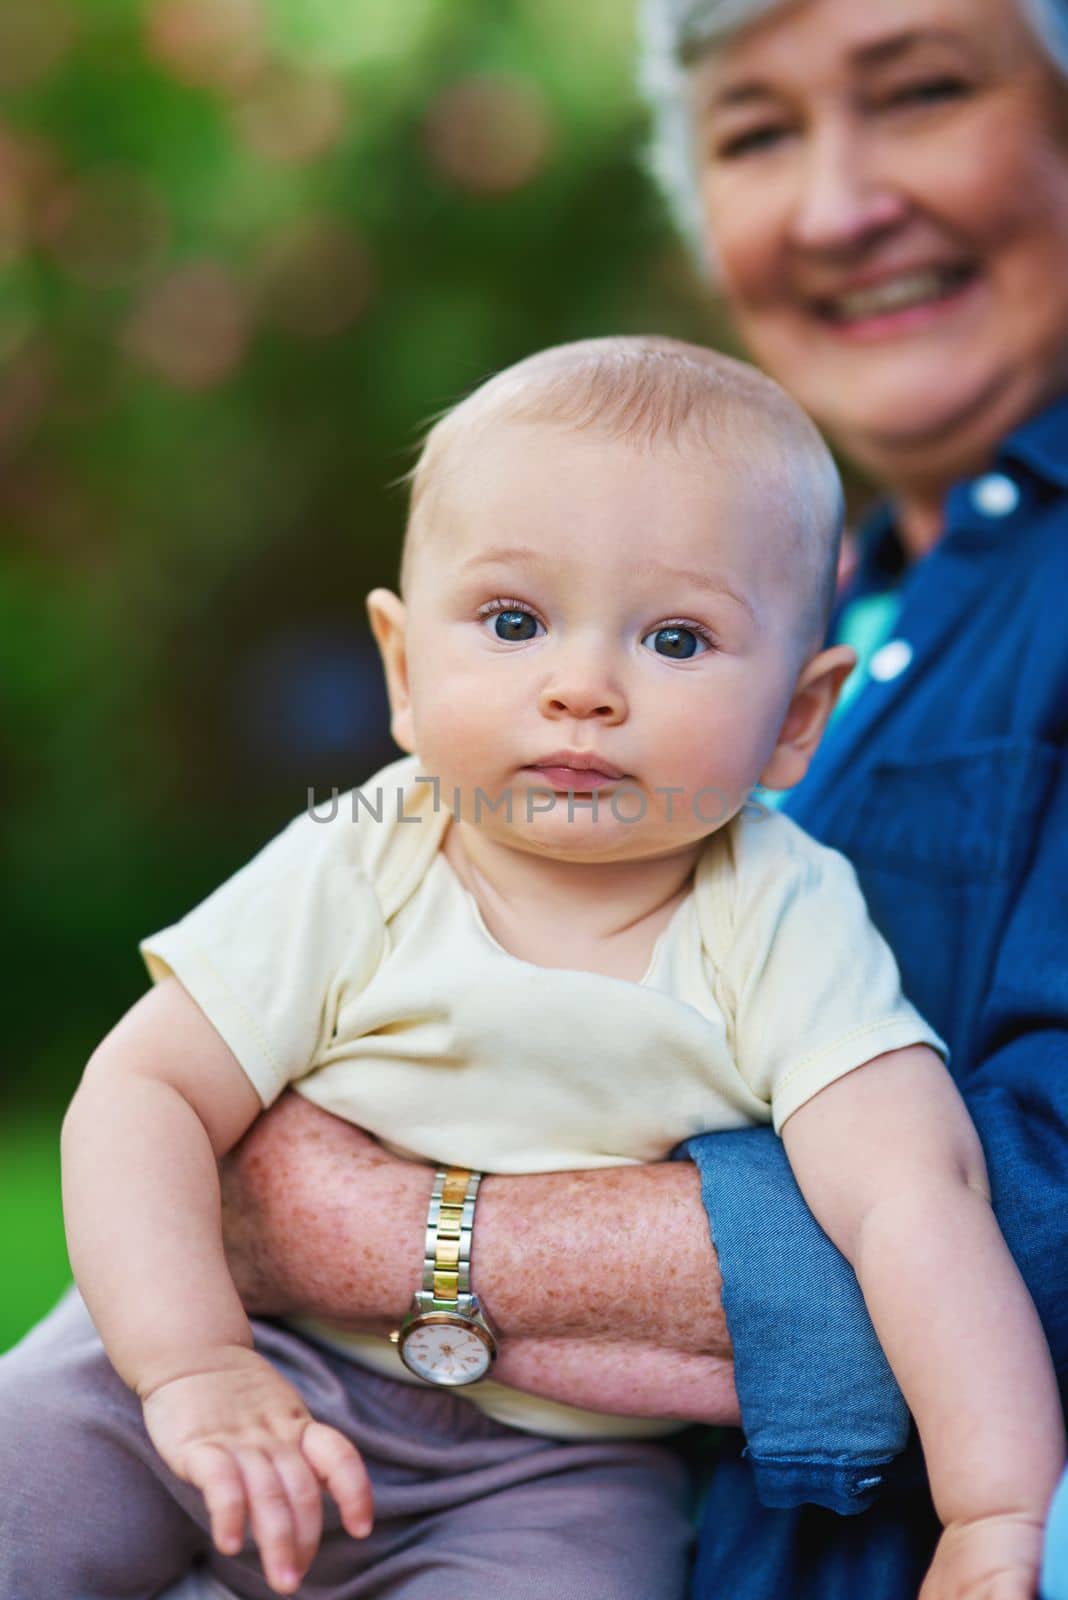 Its grandma time. a baby boy spending time outdoors with his grandmother